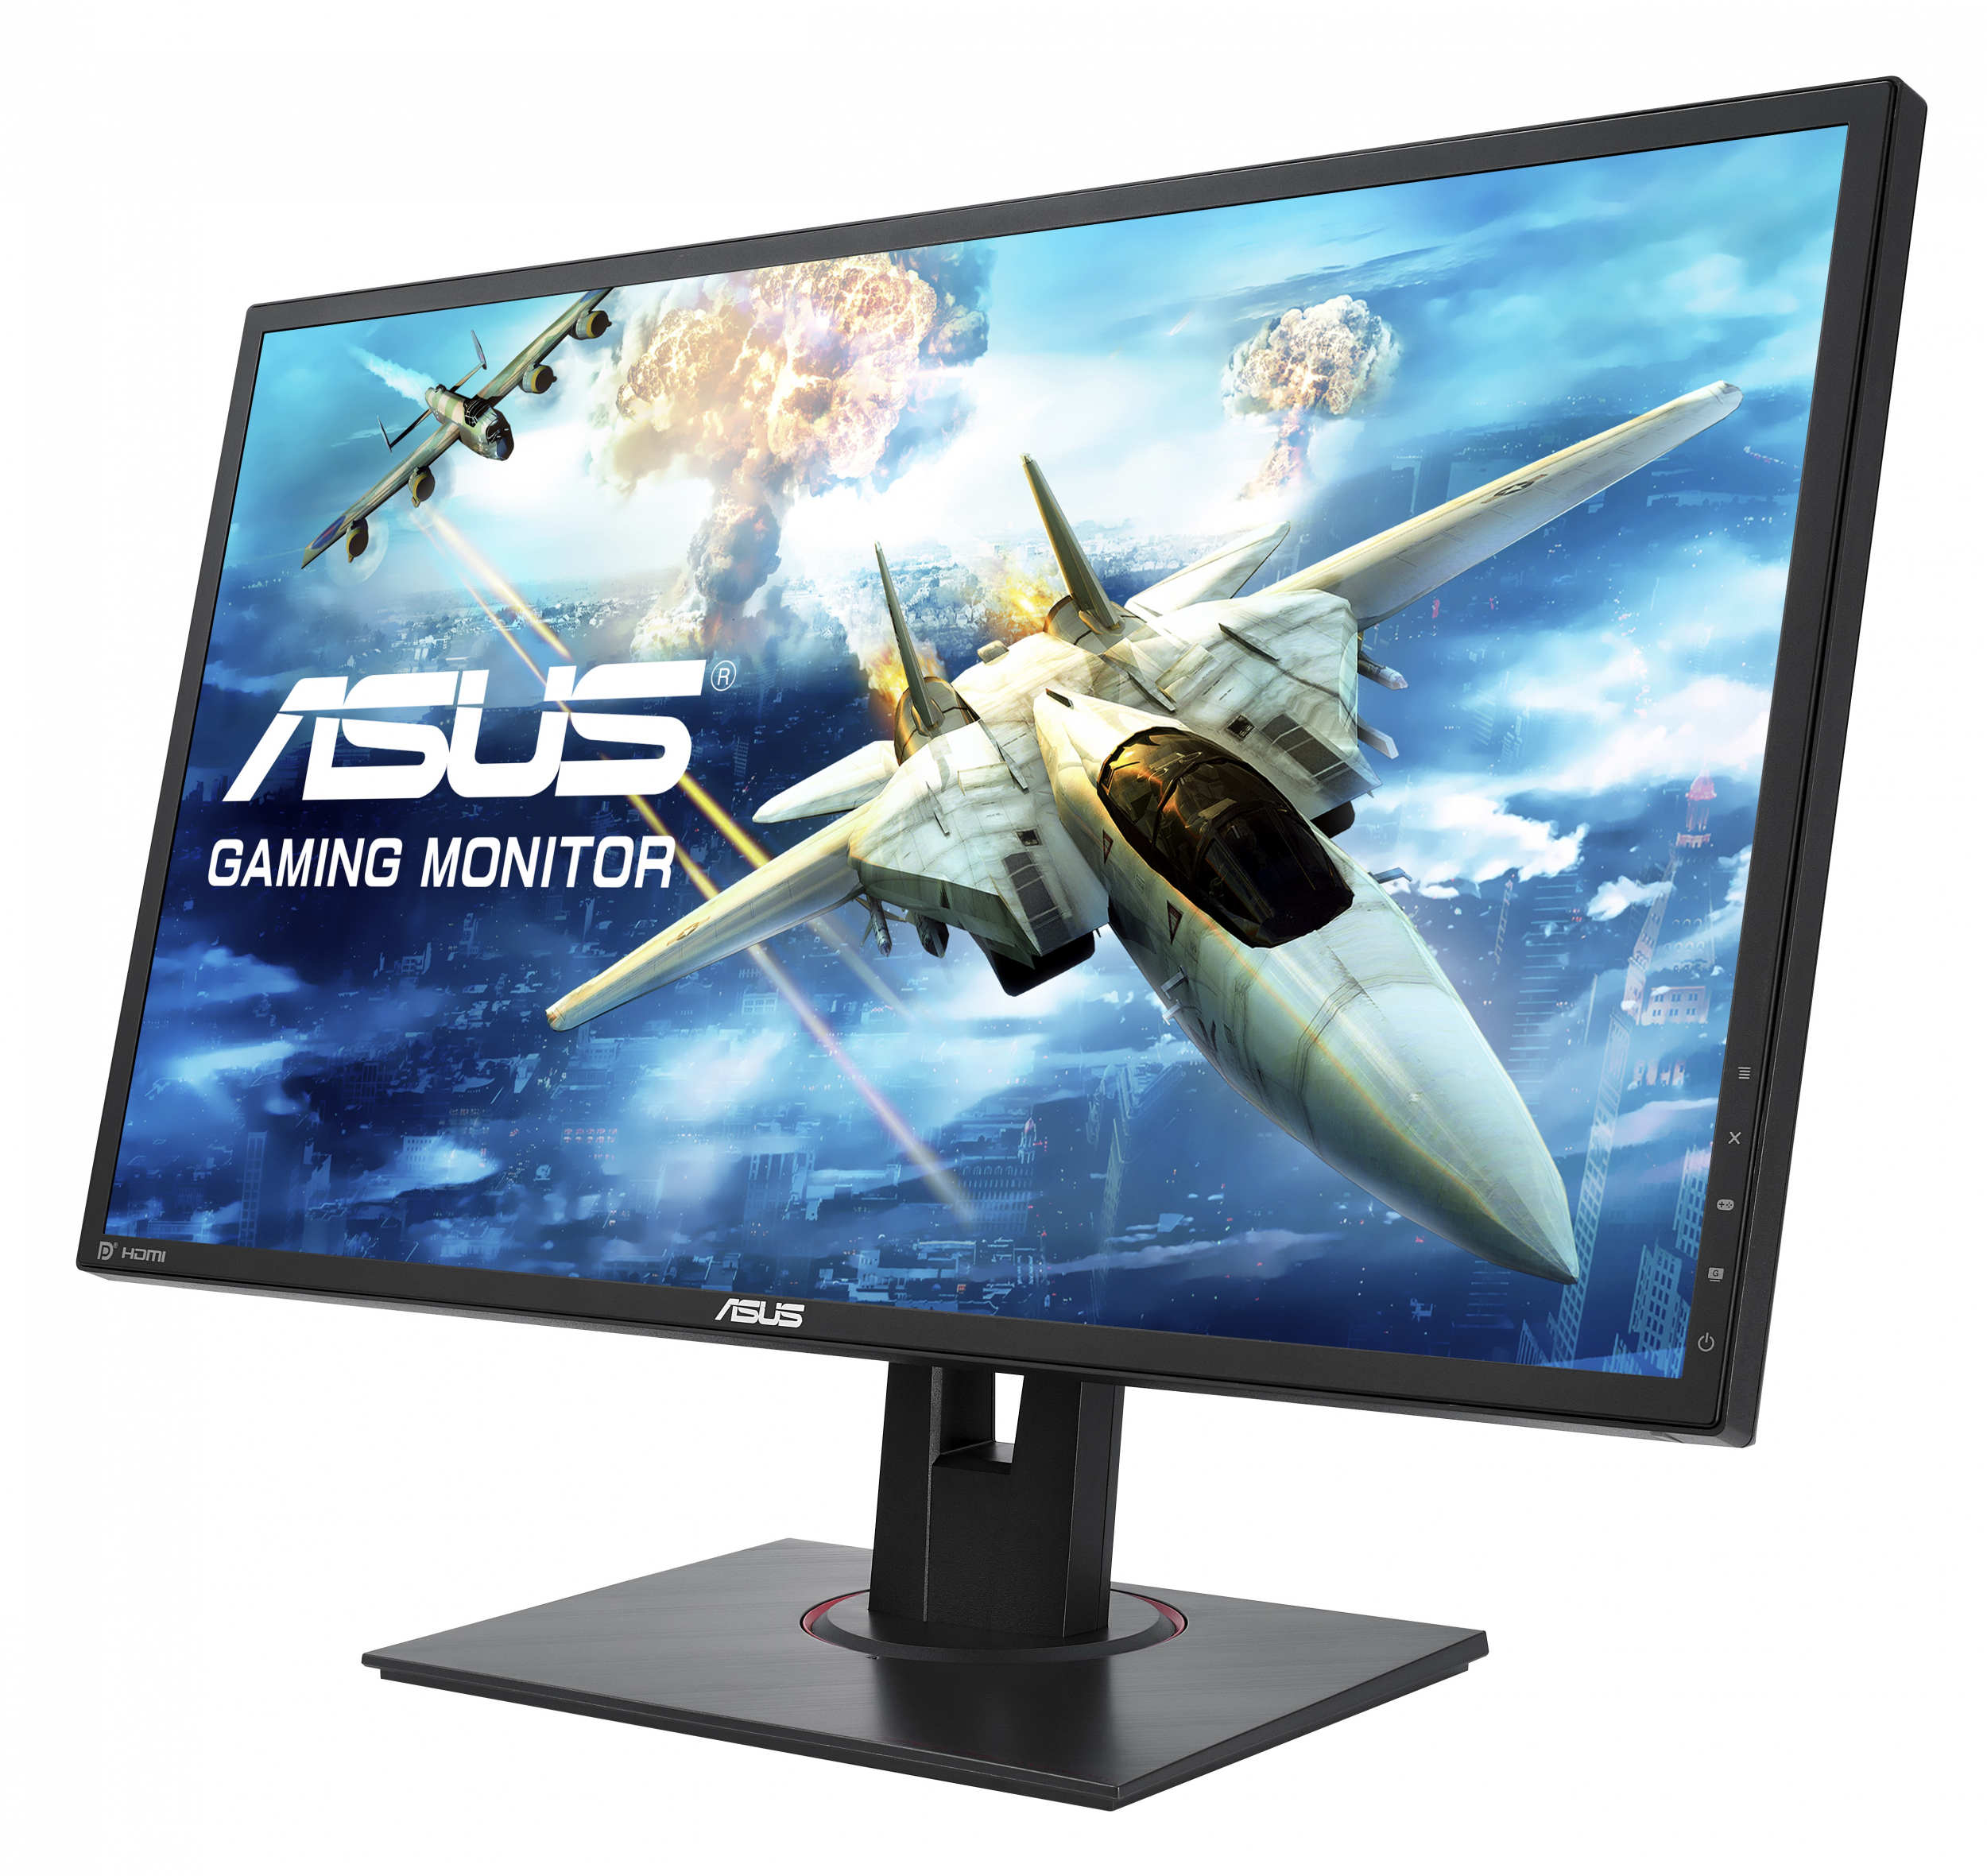 MG248QE Monitor for Gaming